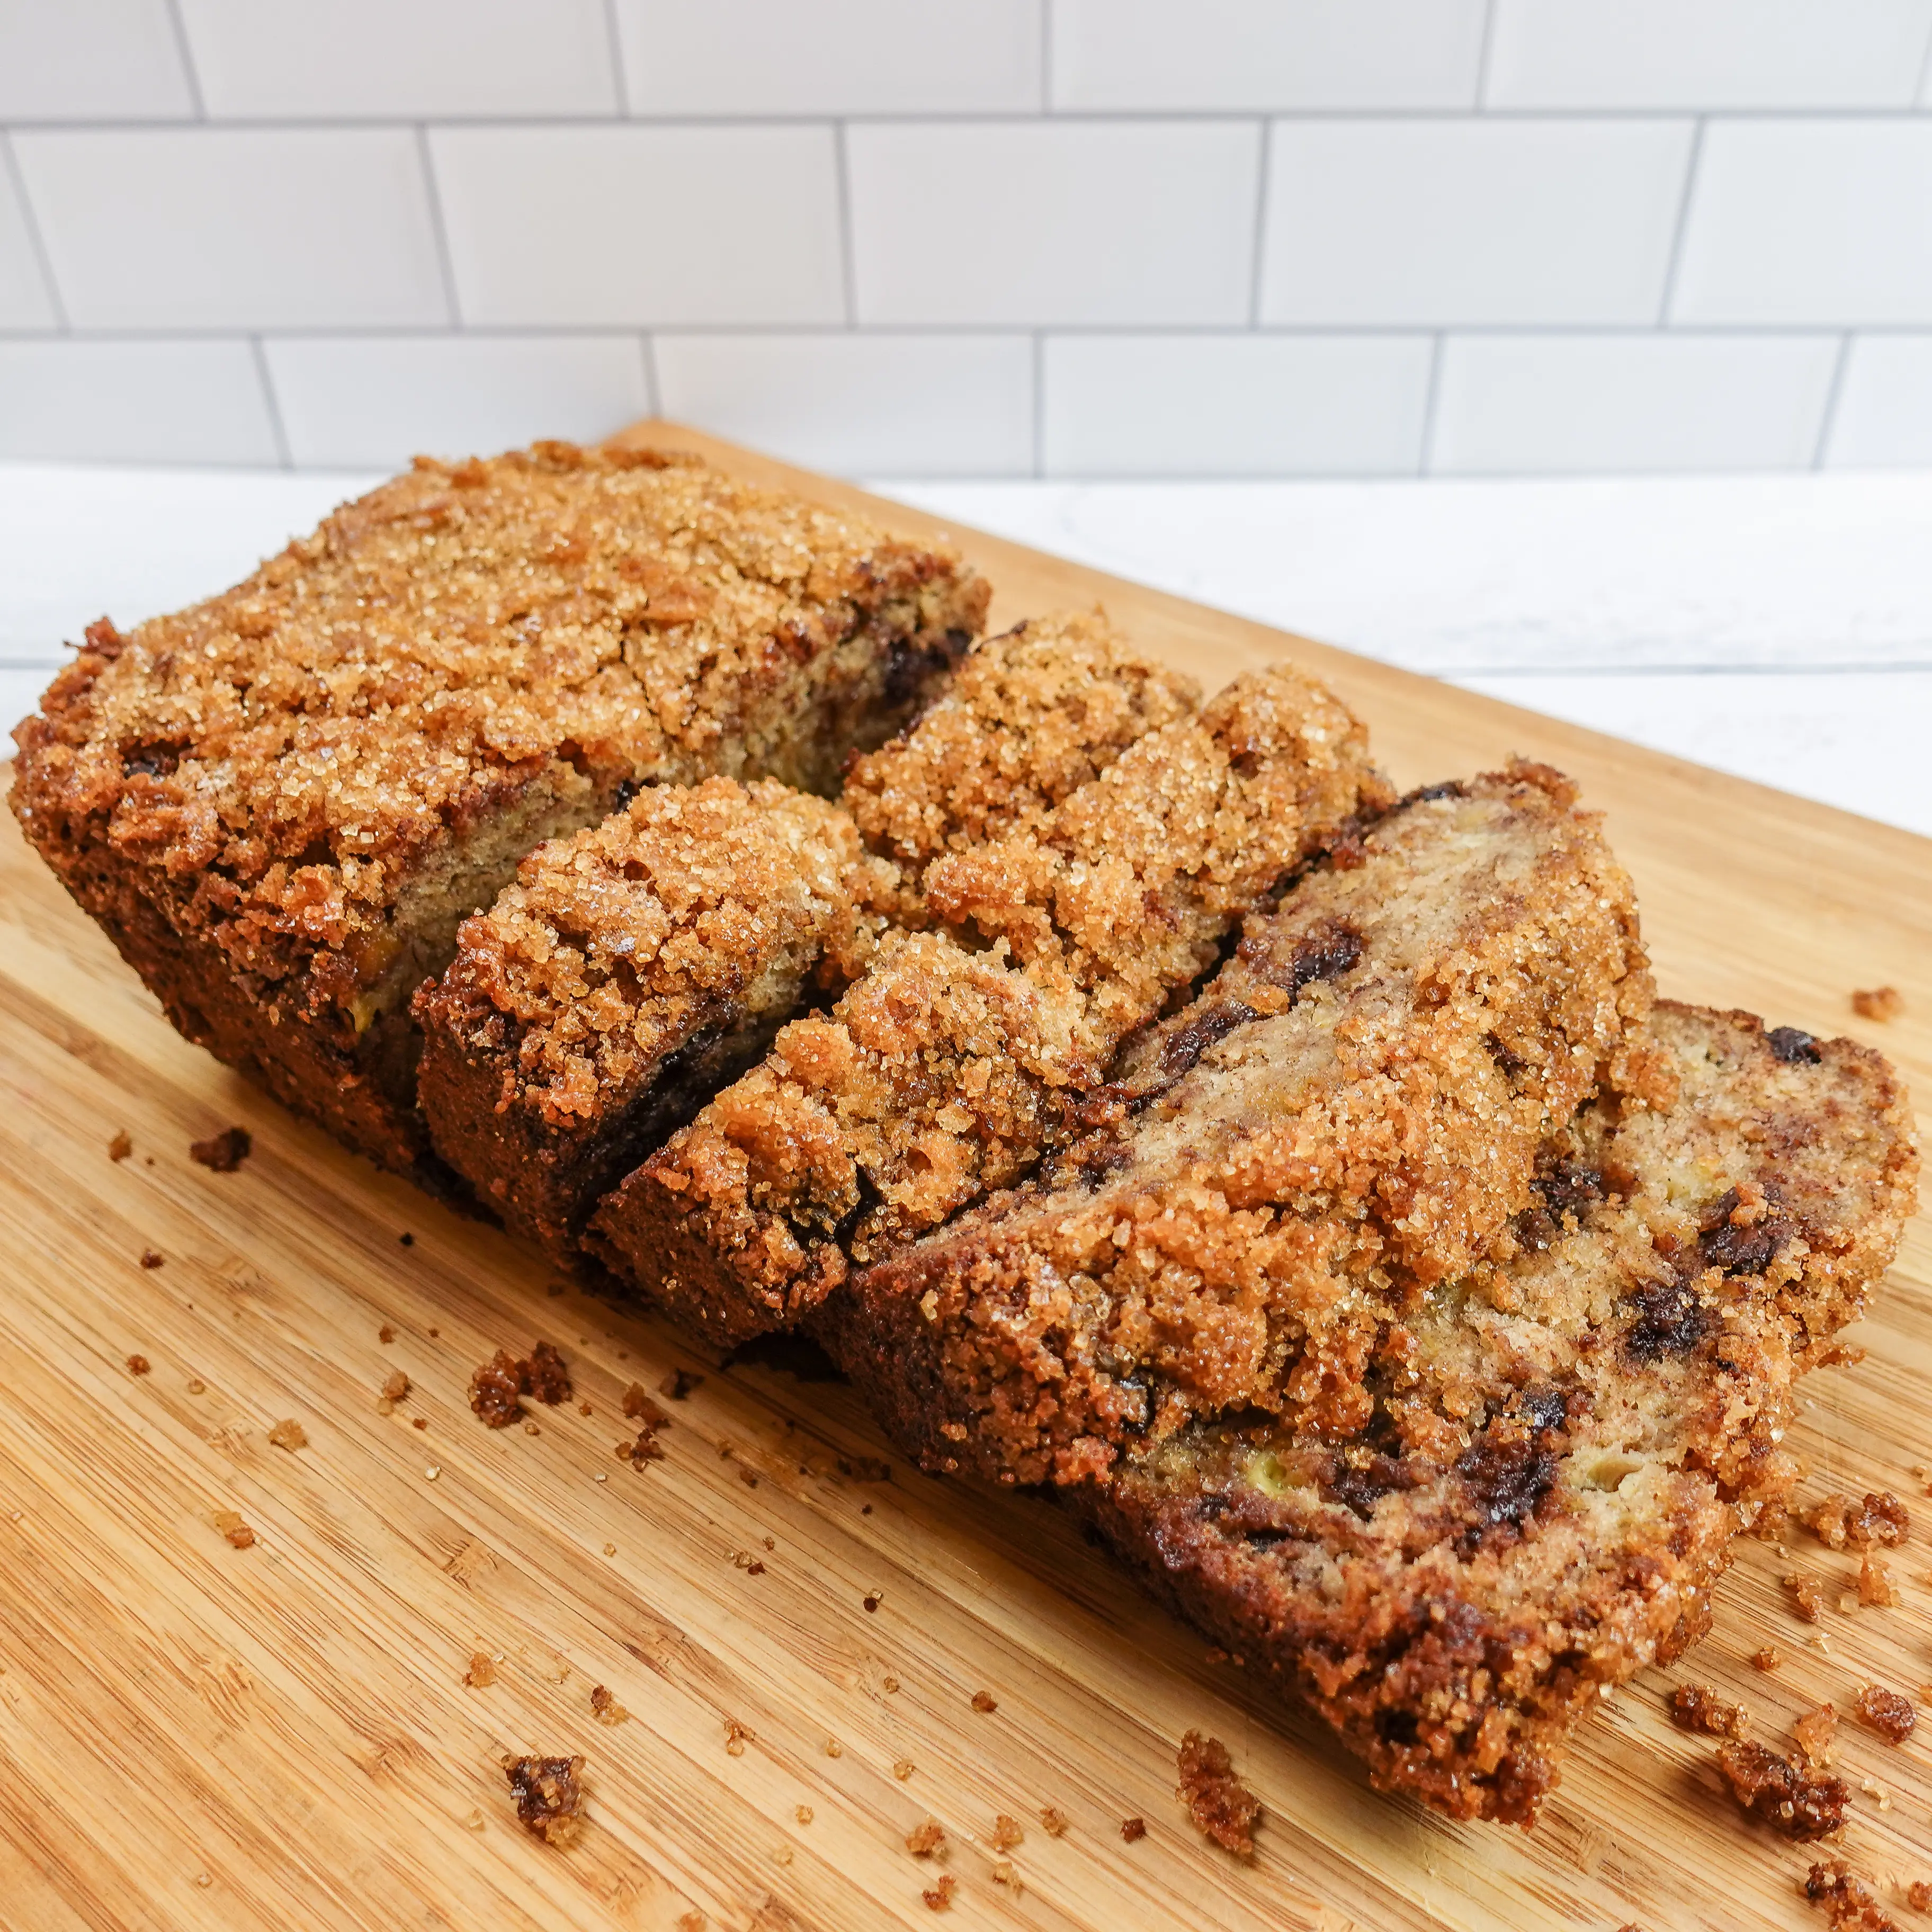 Warm, crumbly, delicious banana bread with melting chocolate chips inside, cut into slices on a wooden cutting board surrounded by crumbs, on a white wood plank counter with a white tile backsplash.